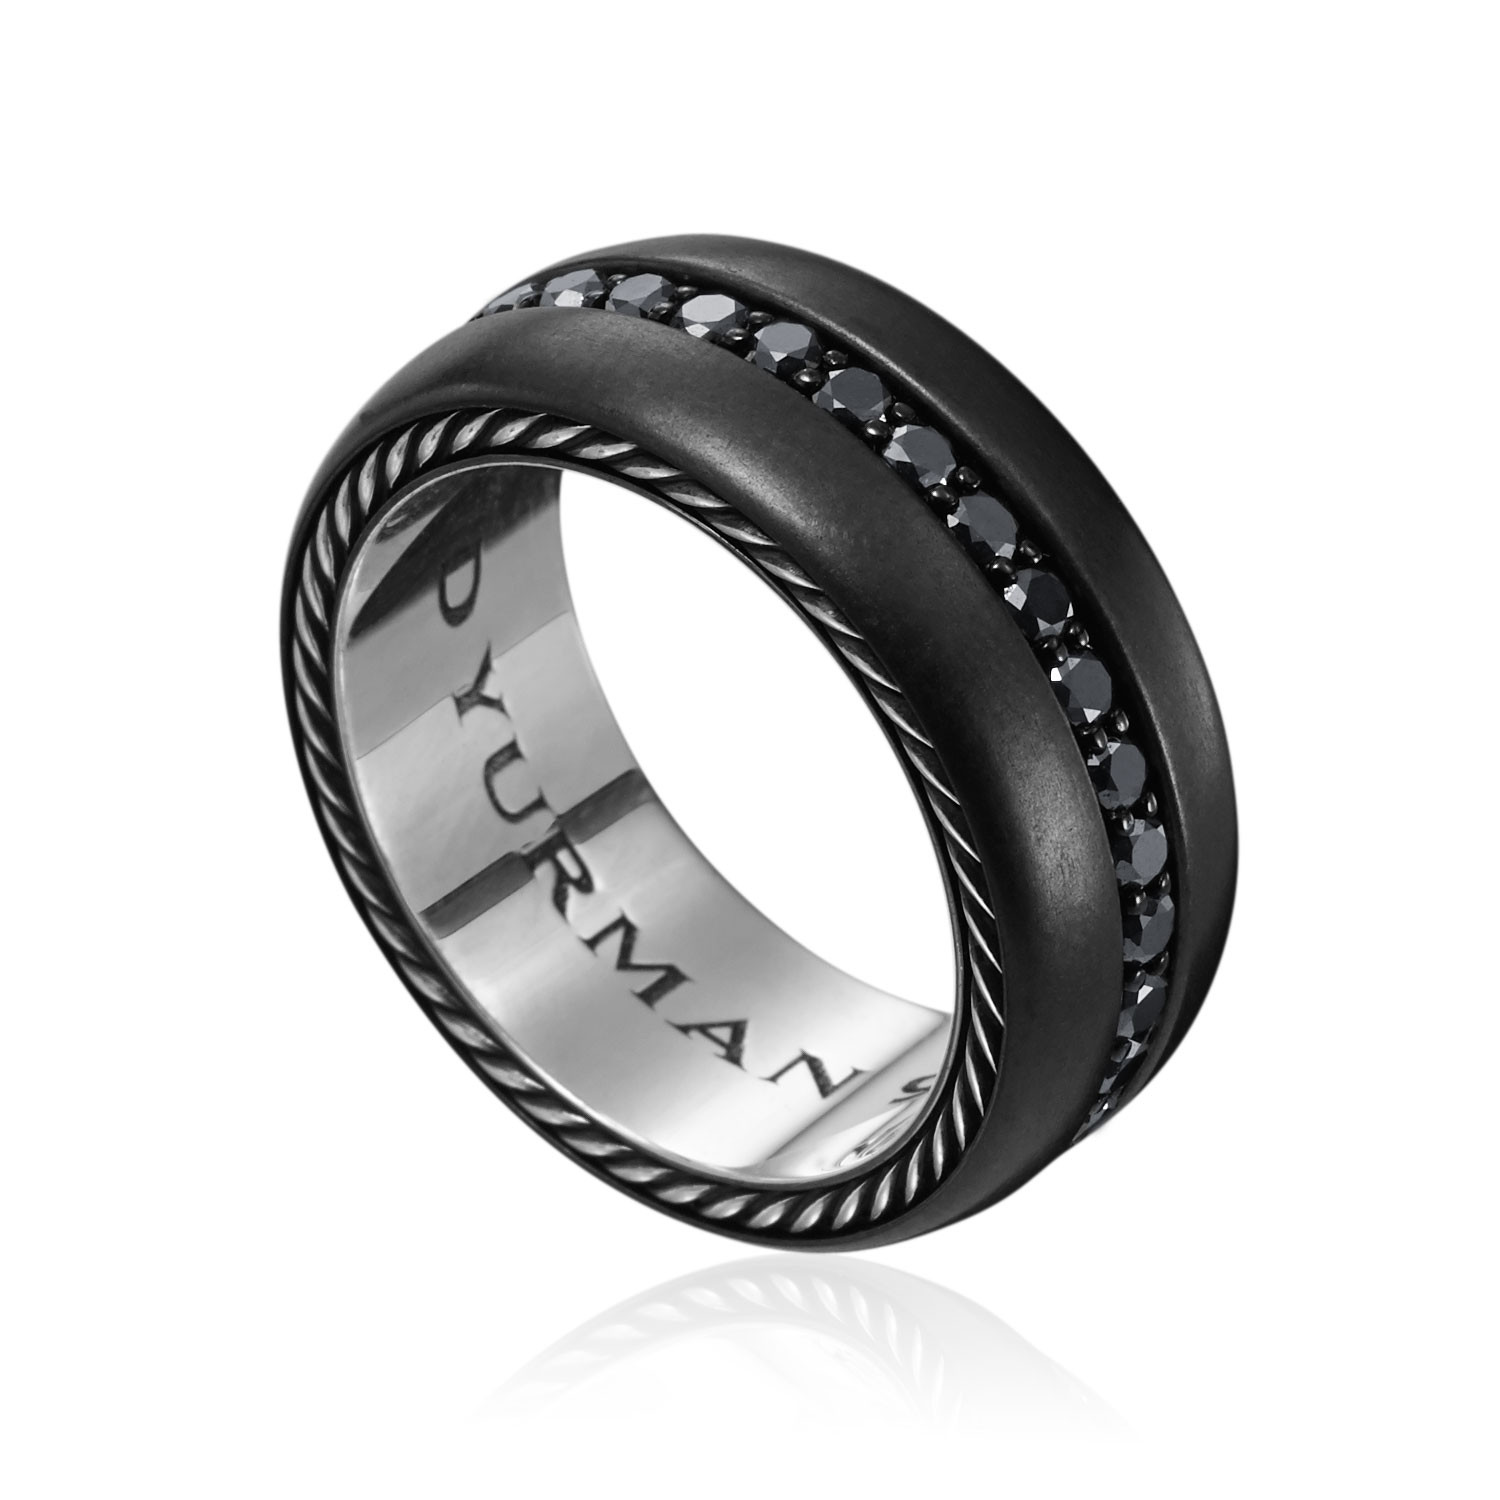 Mens Wedding Rings Black
 Jewelry Gifts for your Guy